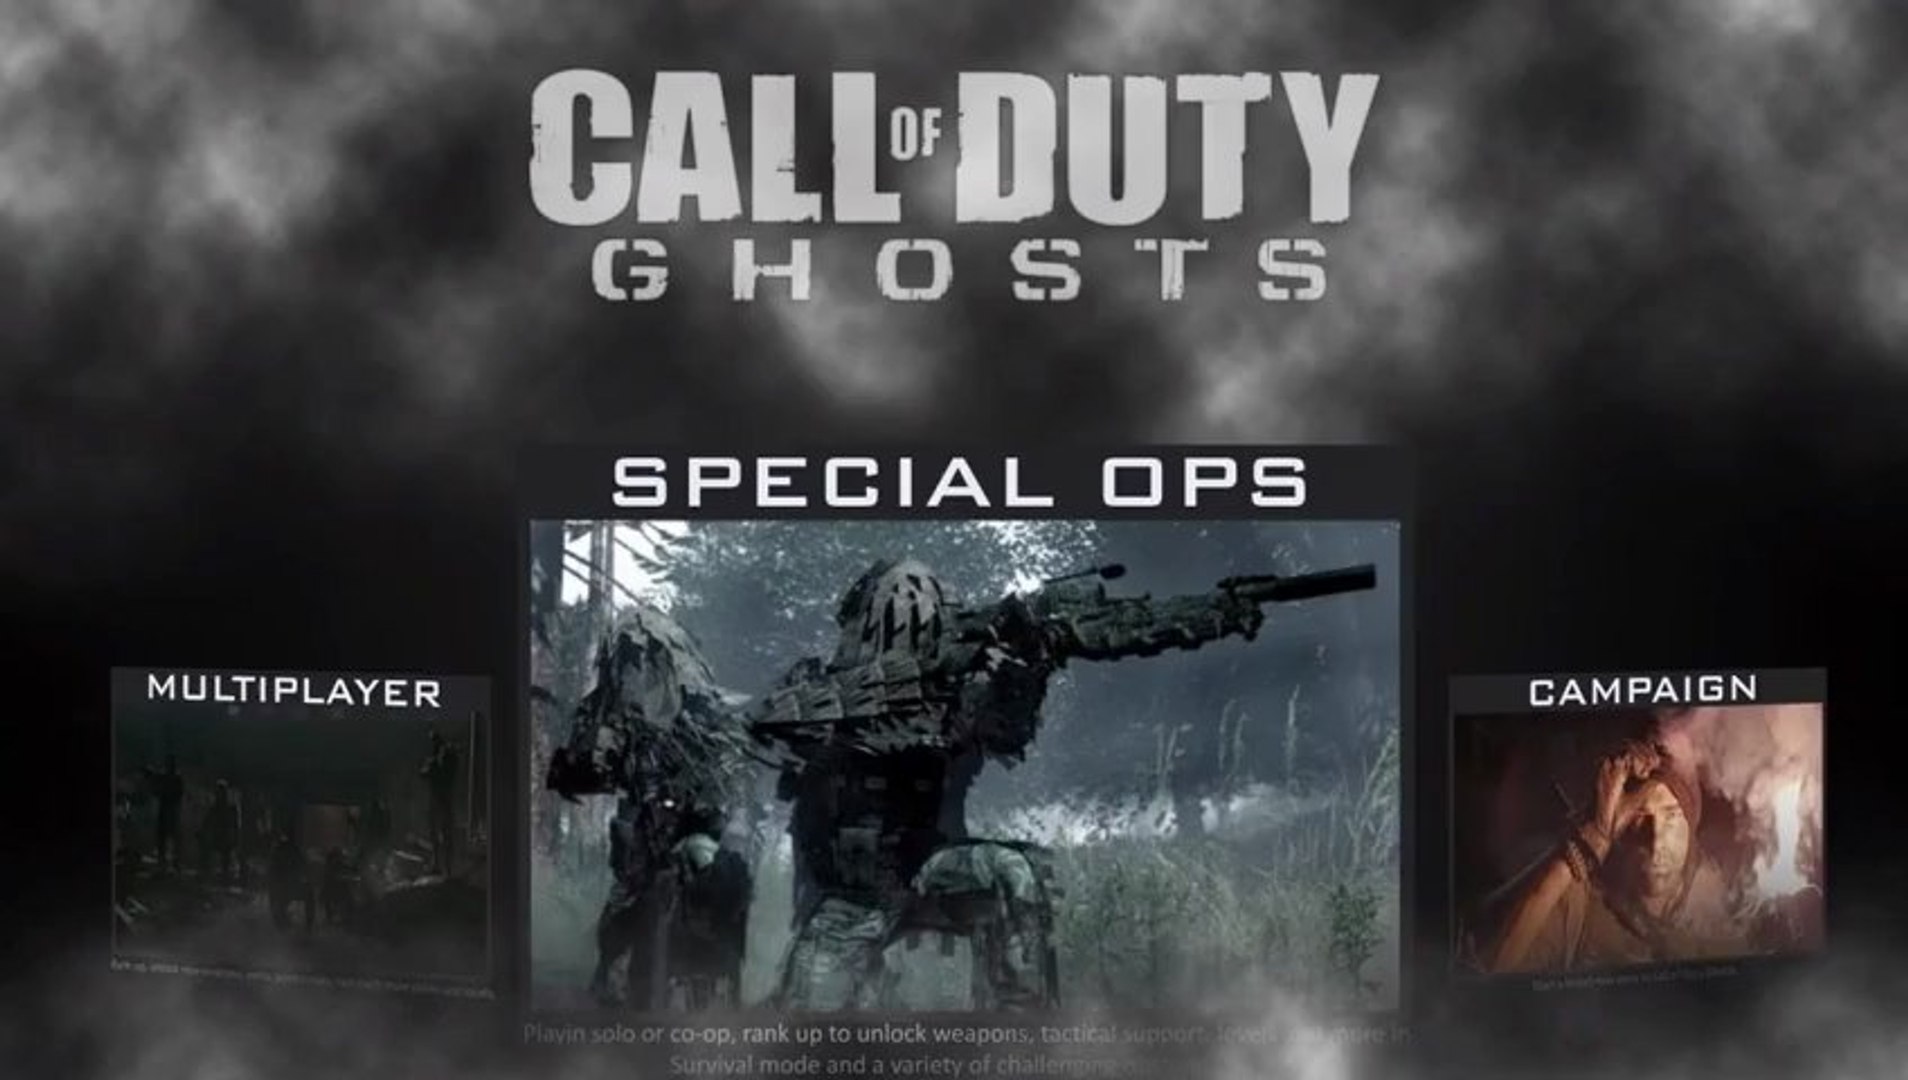 Call of Duty Ghosts Gameplay Walkthrough Part 1 - Campaign Mission 1 (COD  Ghosts) 